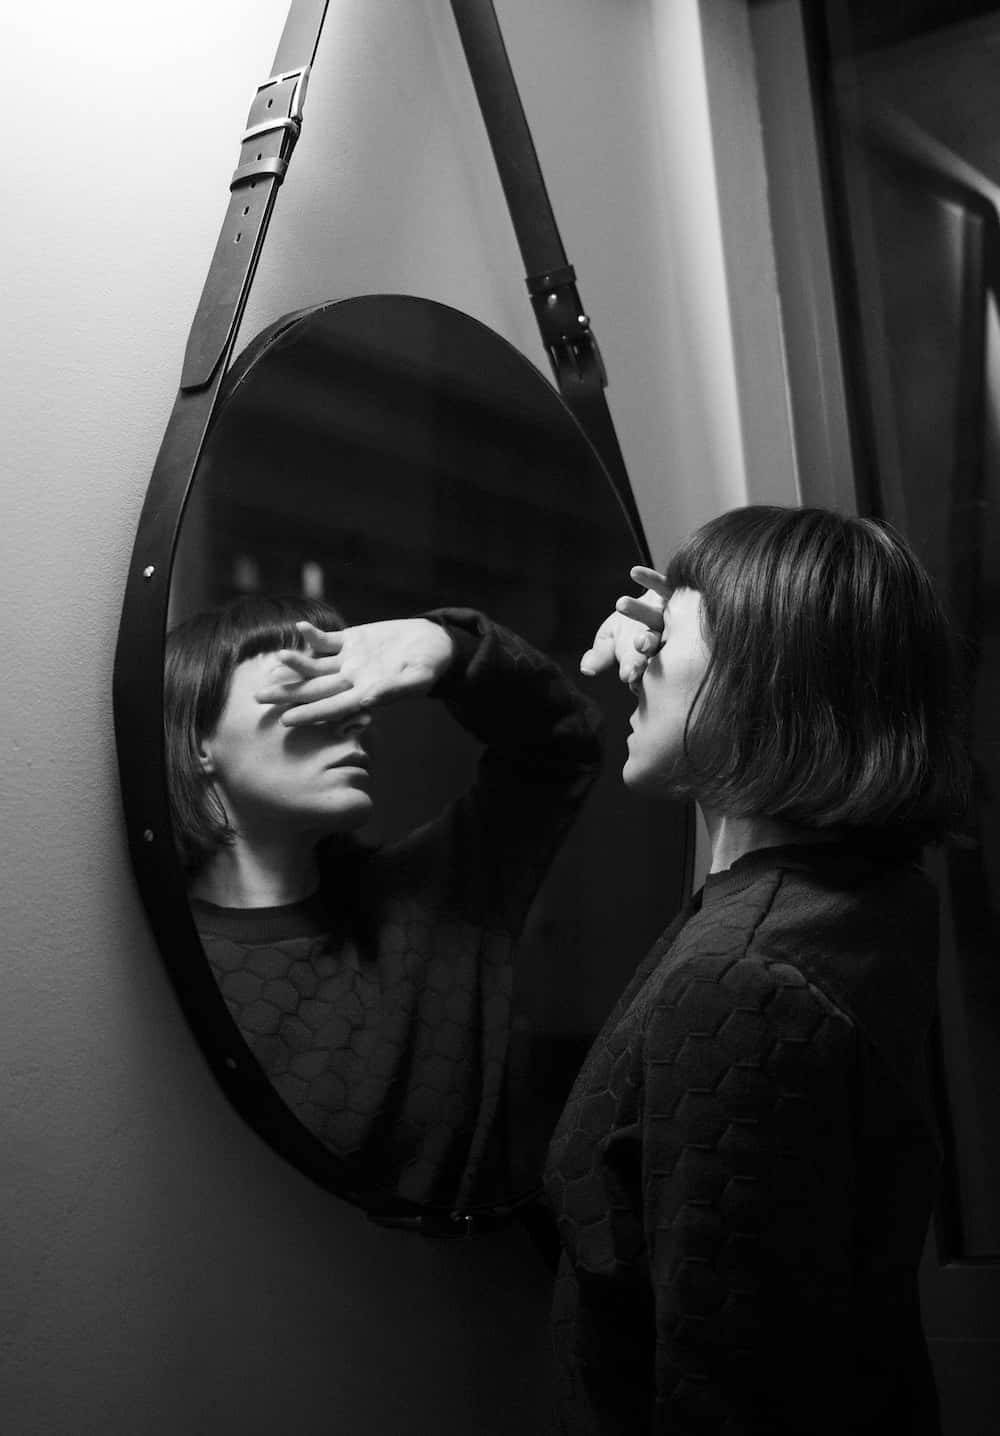 Woman Covering Her Eyes Mirror Reflection Picture